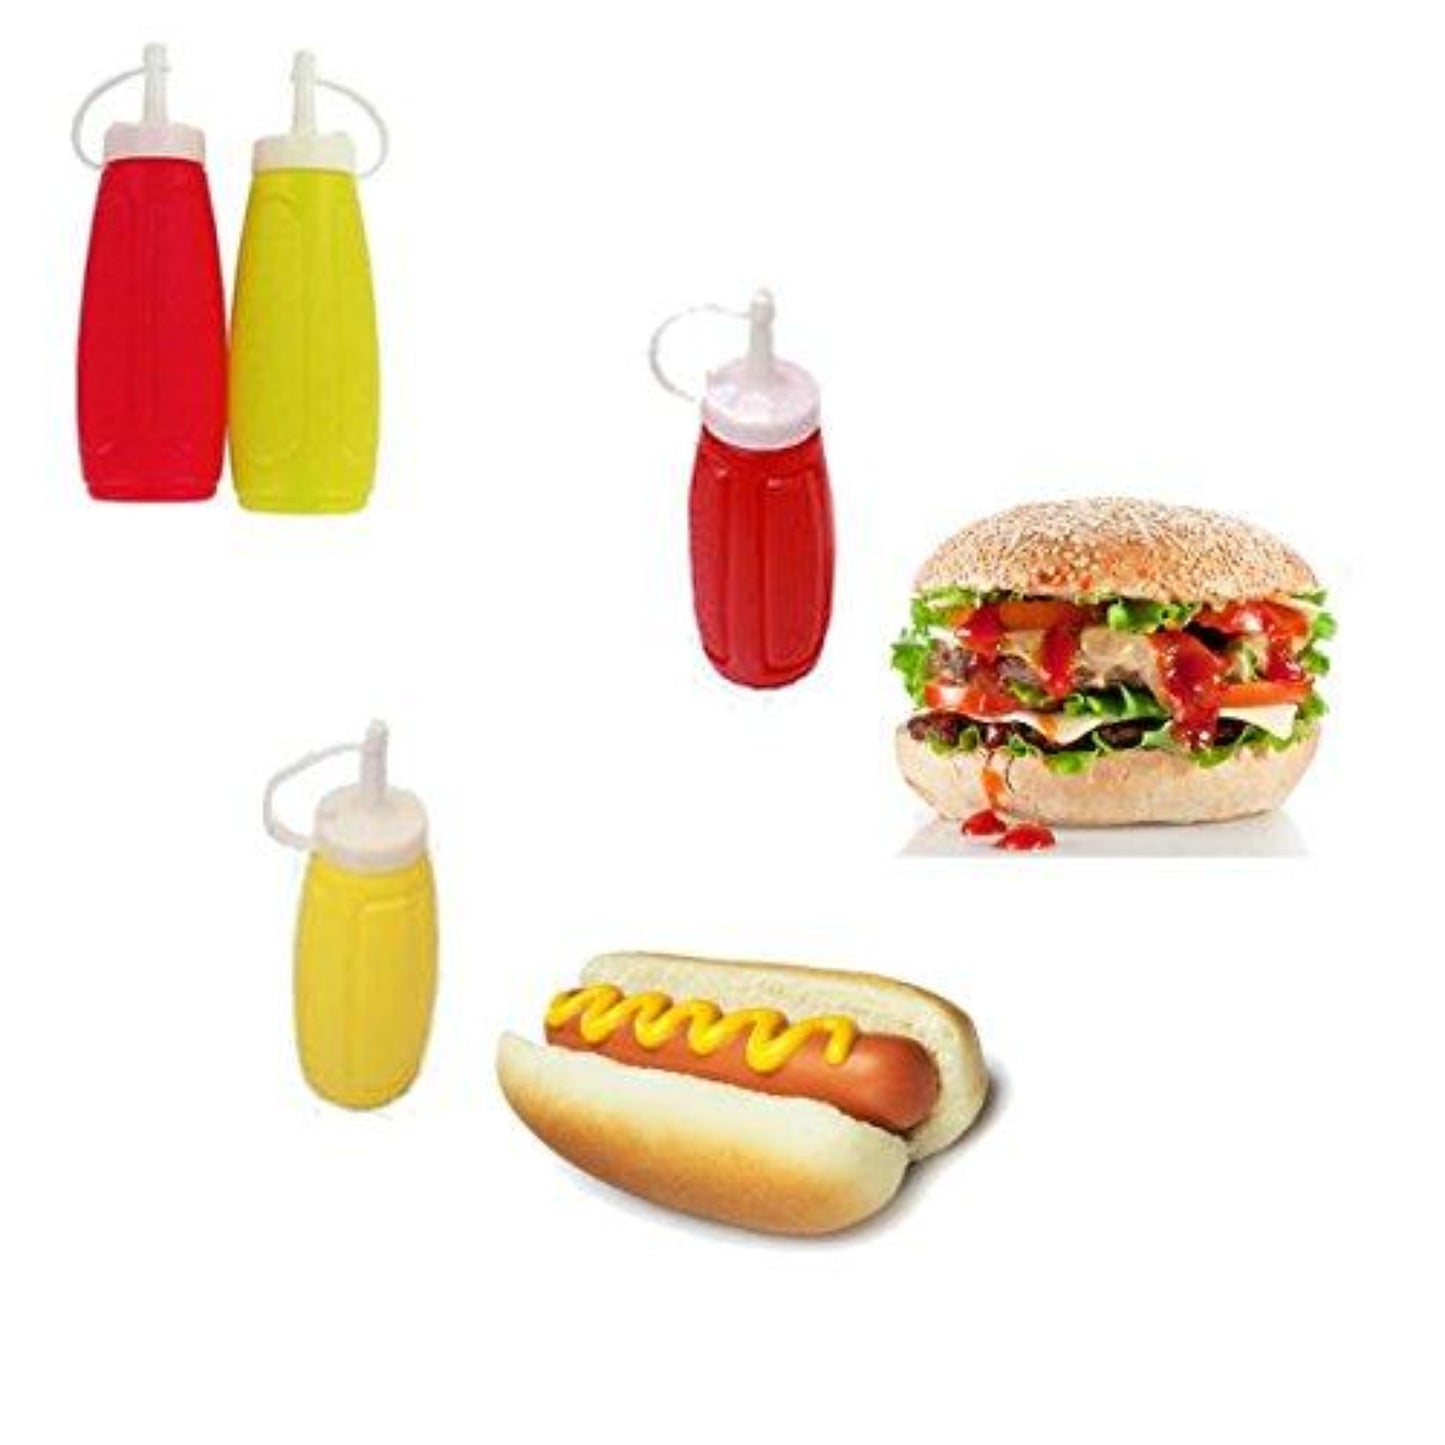 Picnic Table Dispenser Ketchup and Mustard Squeeze 3 Bottles Set Tablesettings Nicole Fantini Collection   